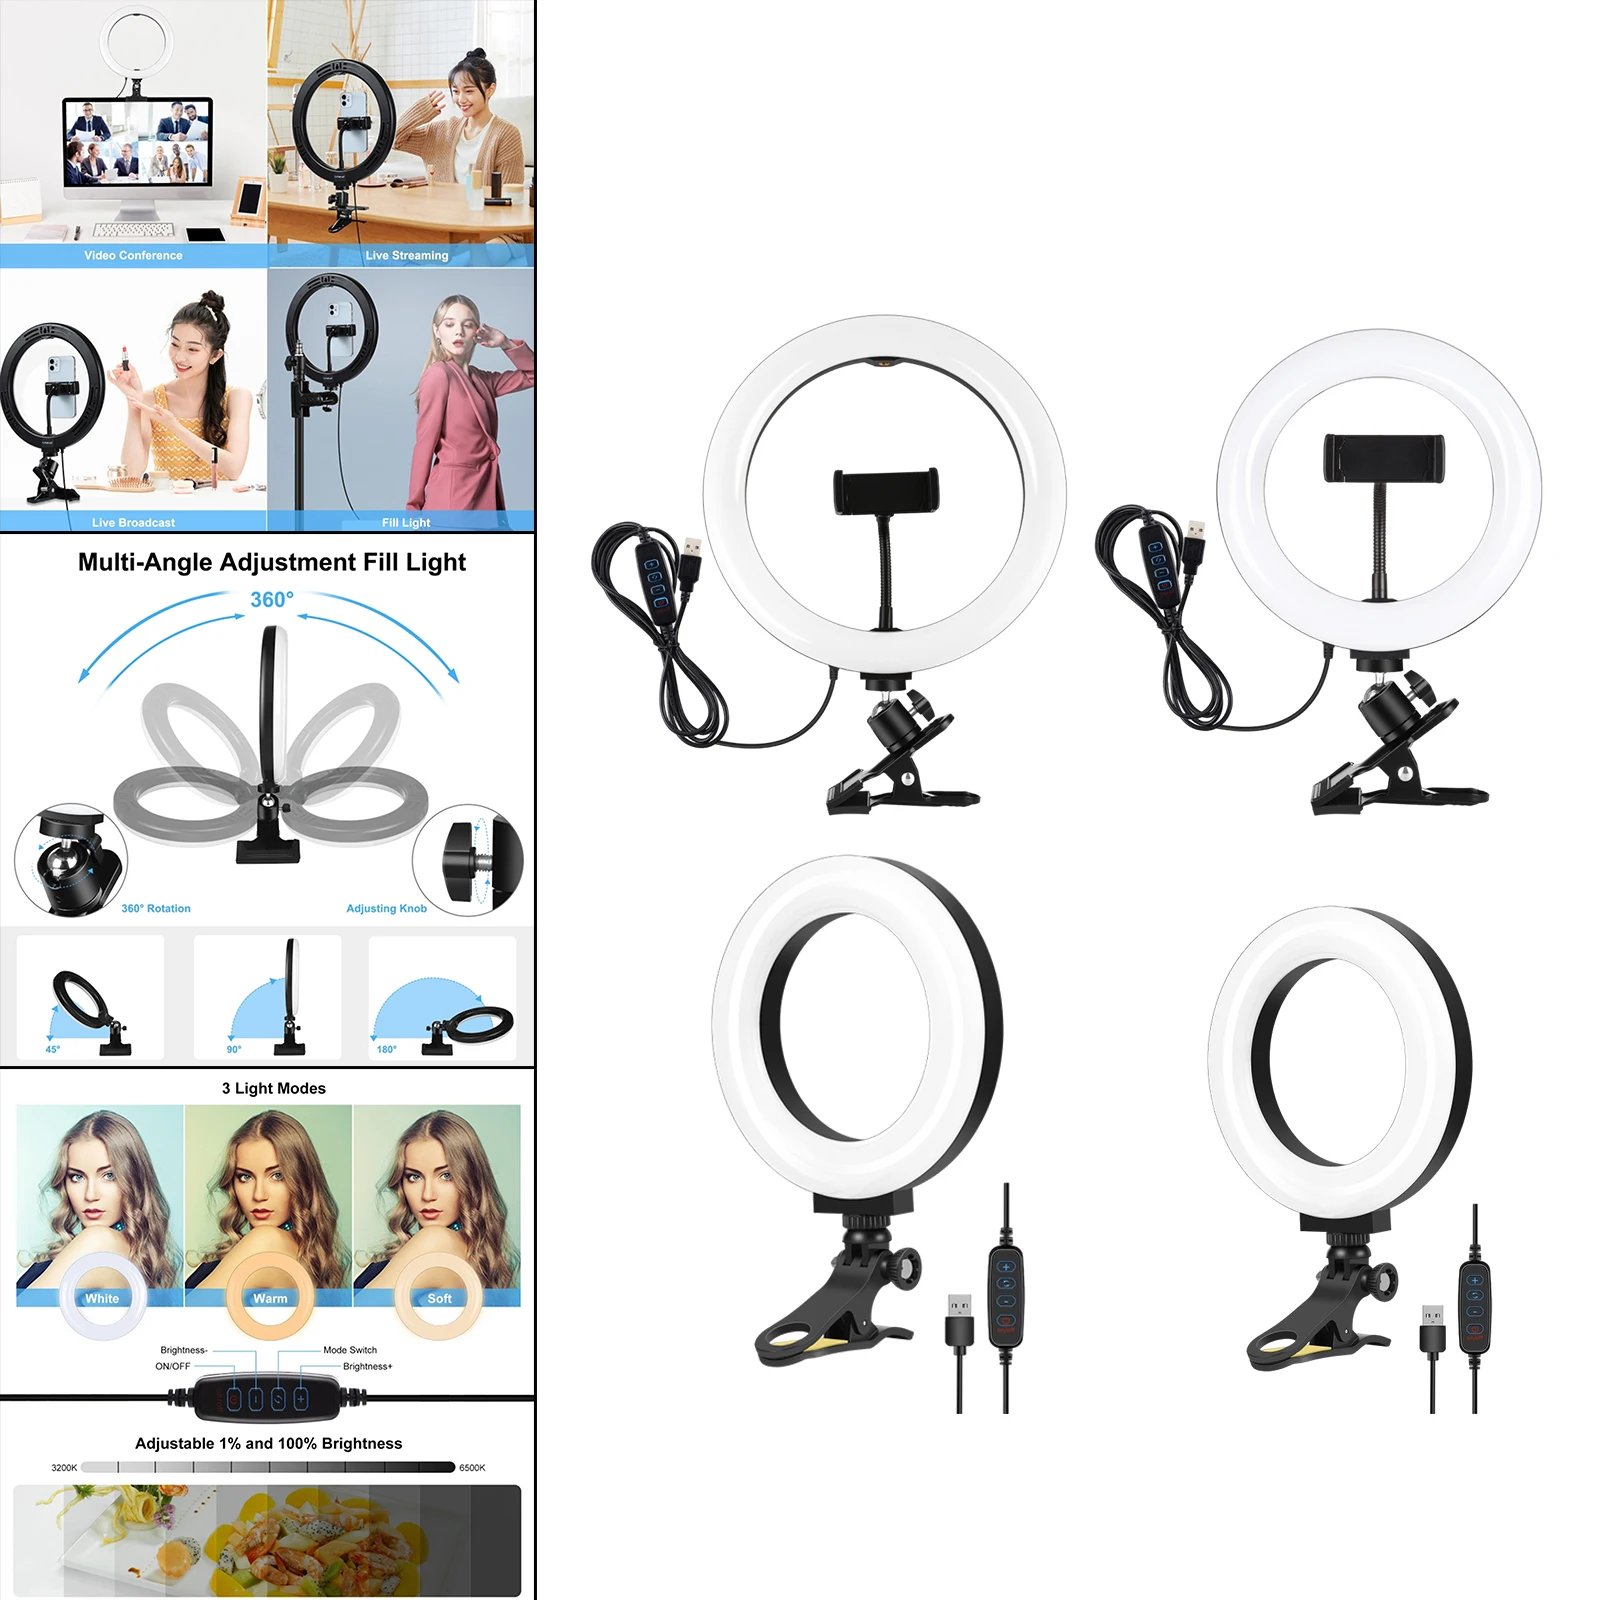 Ring Light Clip on Video Conference Lighting Set, 180 Rotation Angle, 10 Brightness Levels